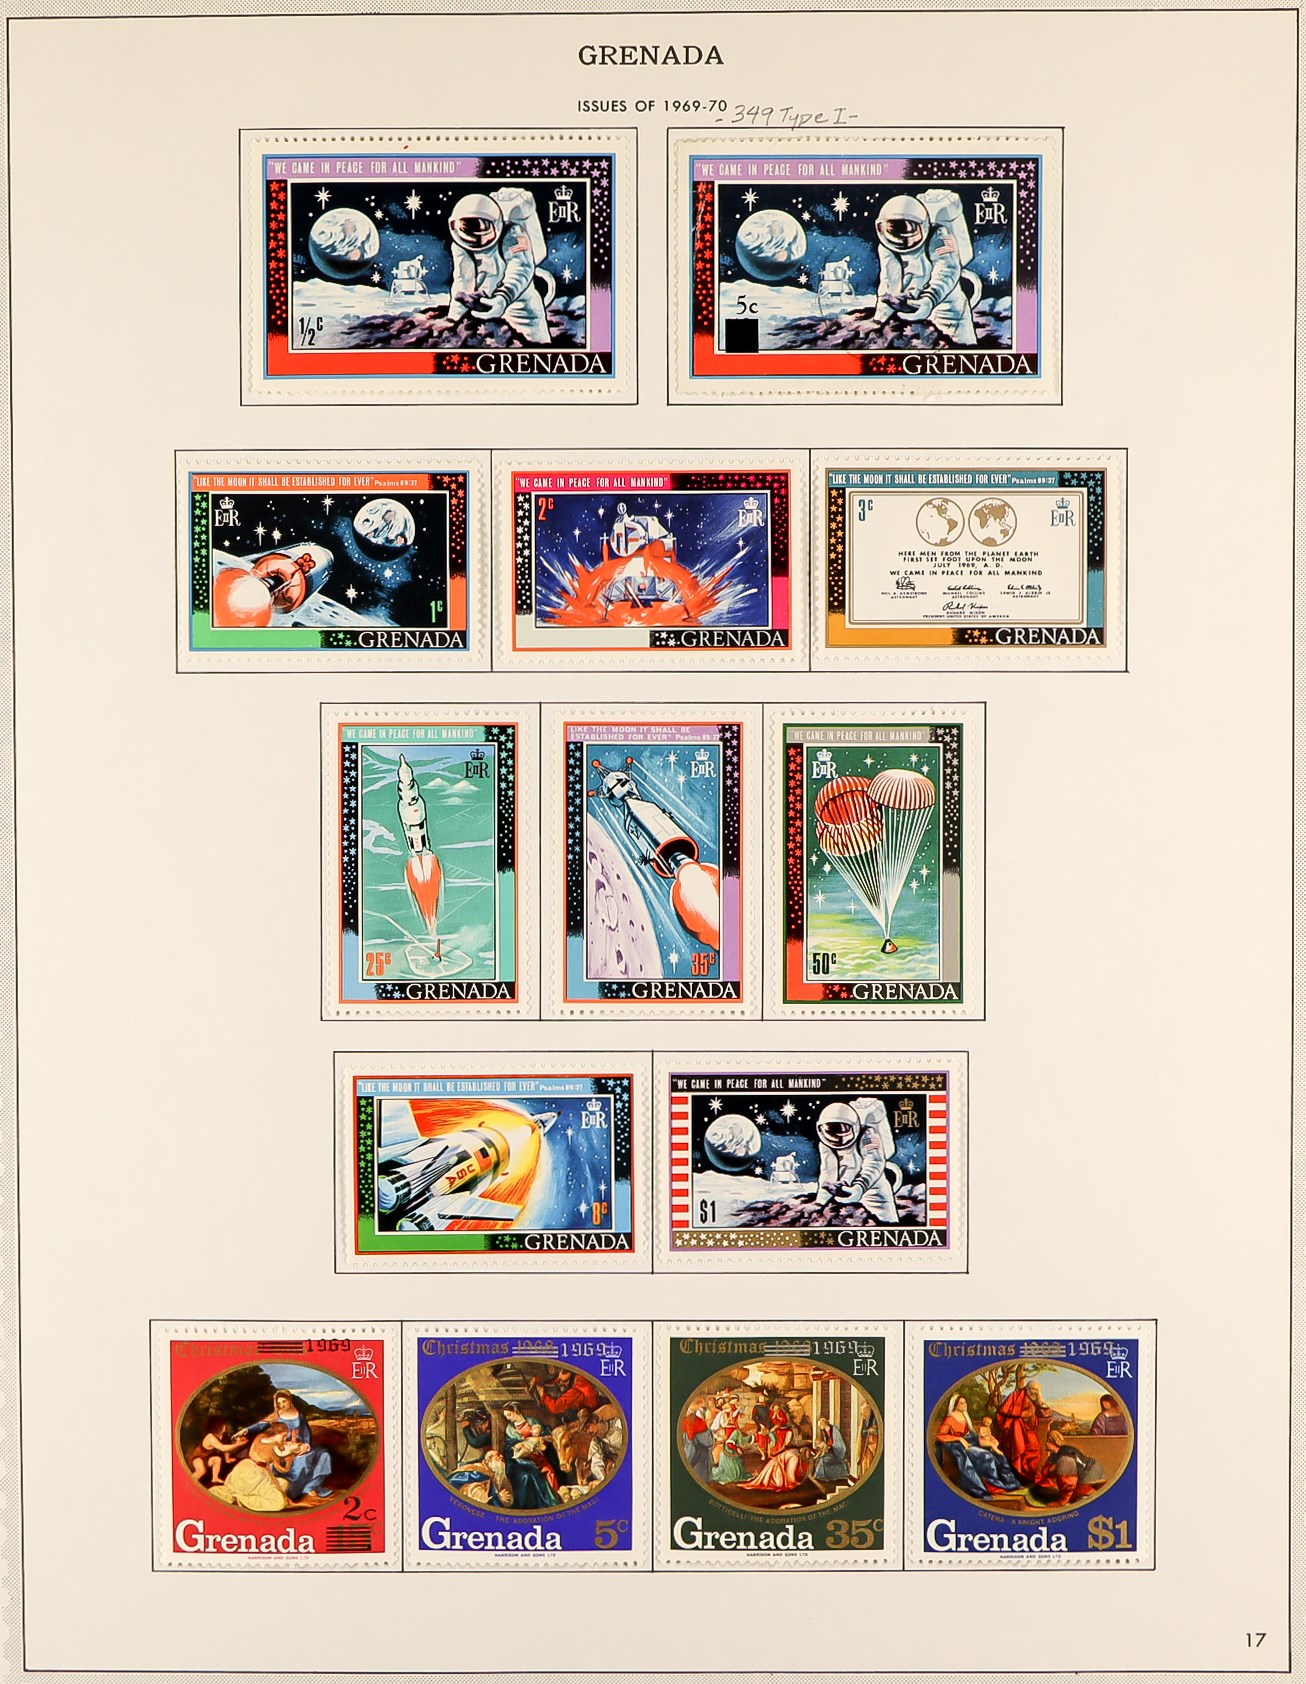 GRENADA 1953 - 1983 COLLECTION in album of chiefly never hinged mint sets & miniature sheets, some - Image 3 of 15